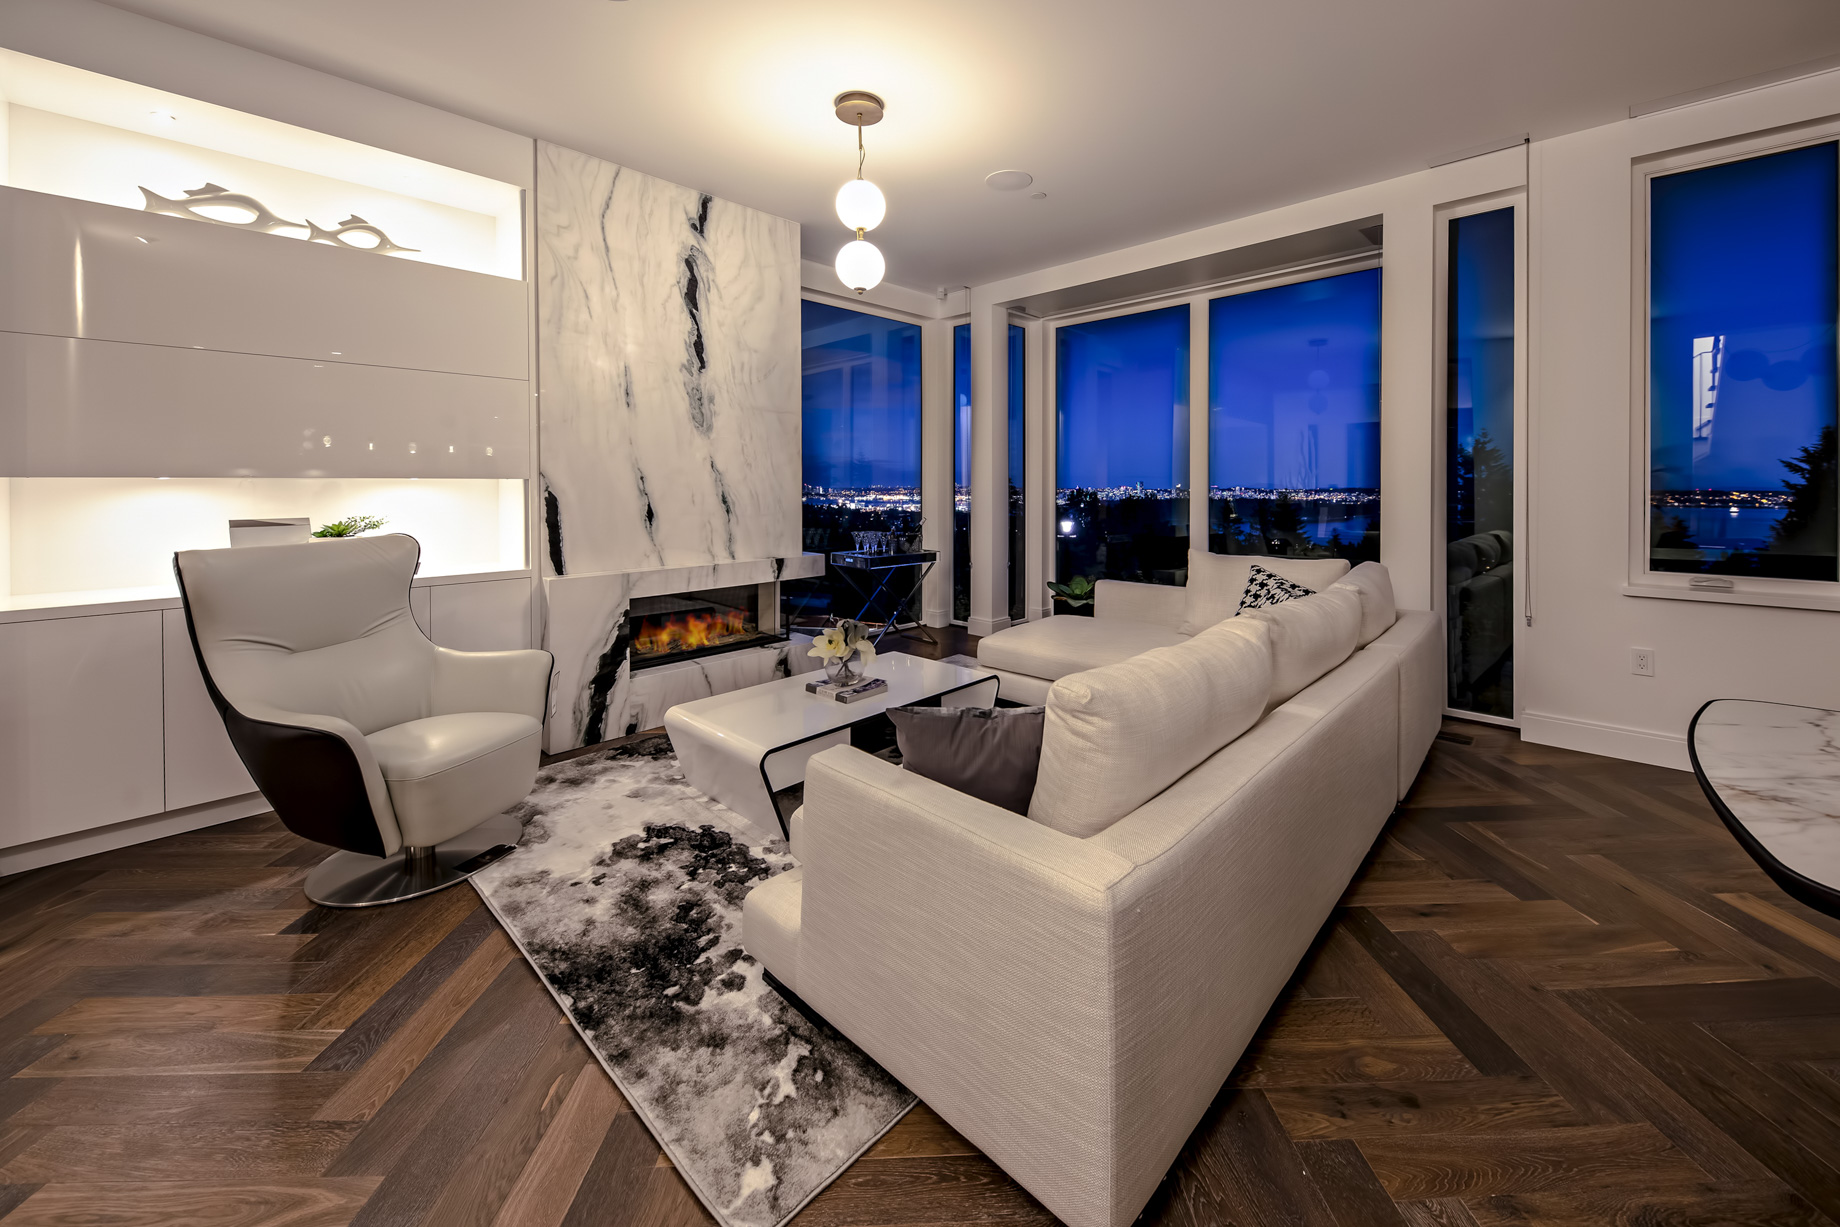 2121 Union Court, West Vancouver, BC, Canada - Guest Room - Luxury Real Estate - West Coast Modern Home